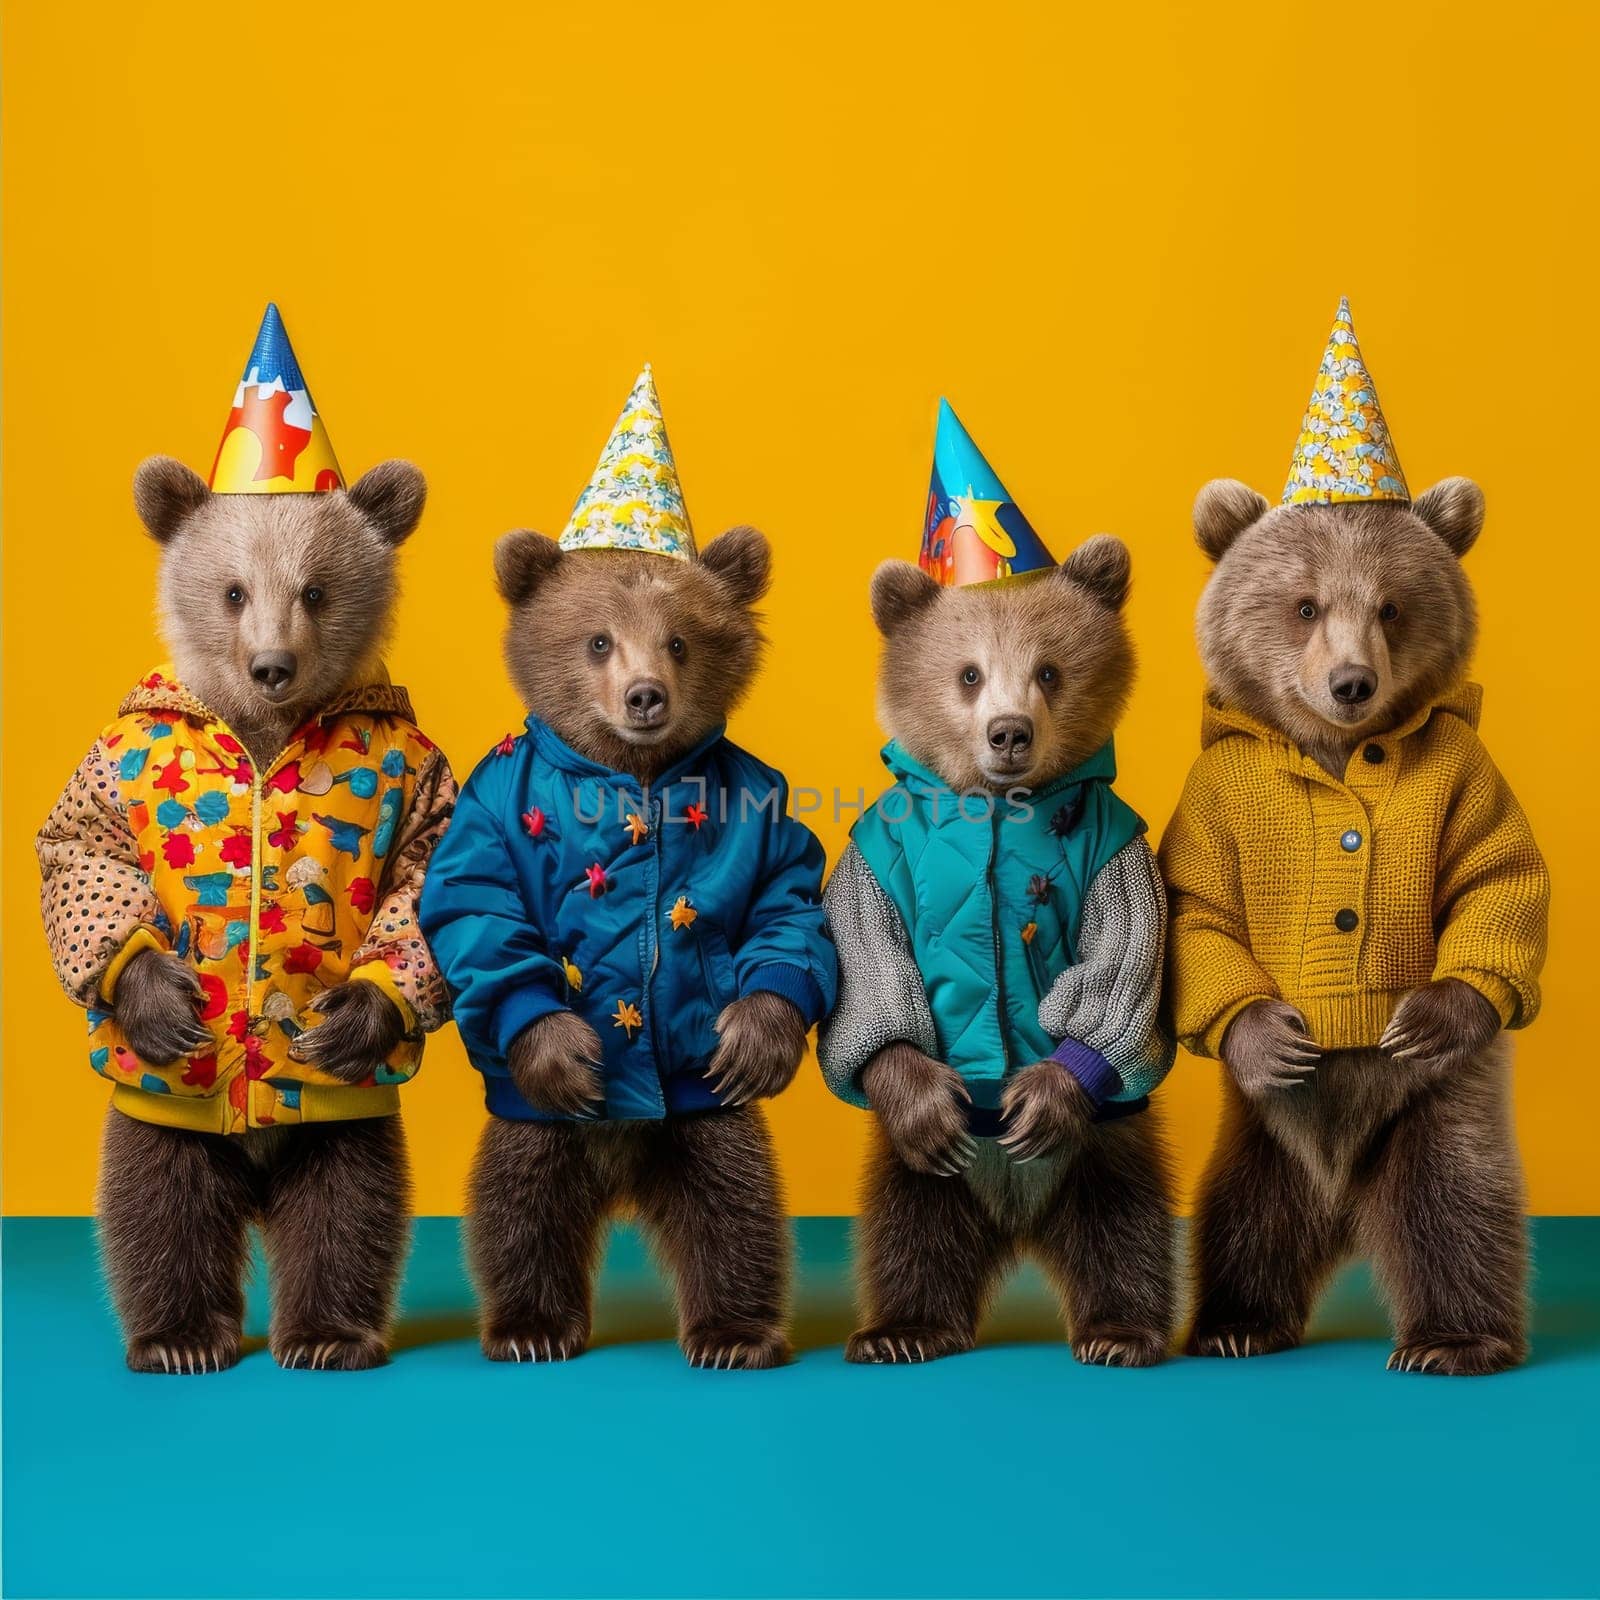 Four bears are wearing hats and jackets and standing in a line. Scene is festive and joyful, as the bears are dressed up for a celebration